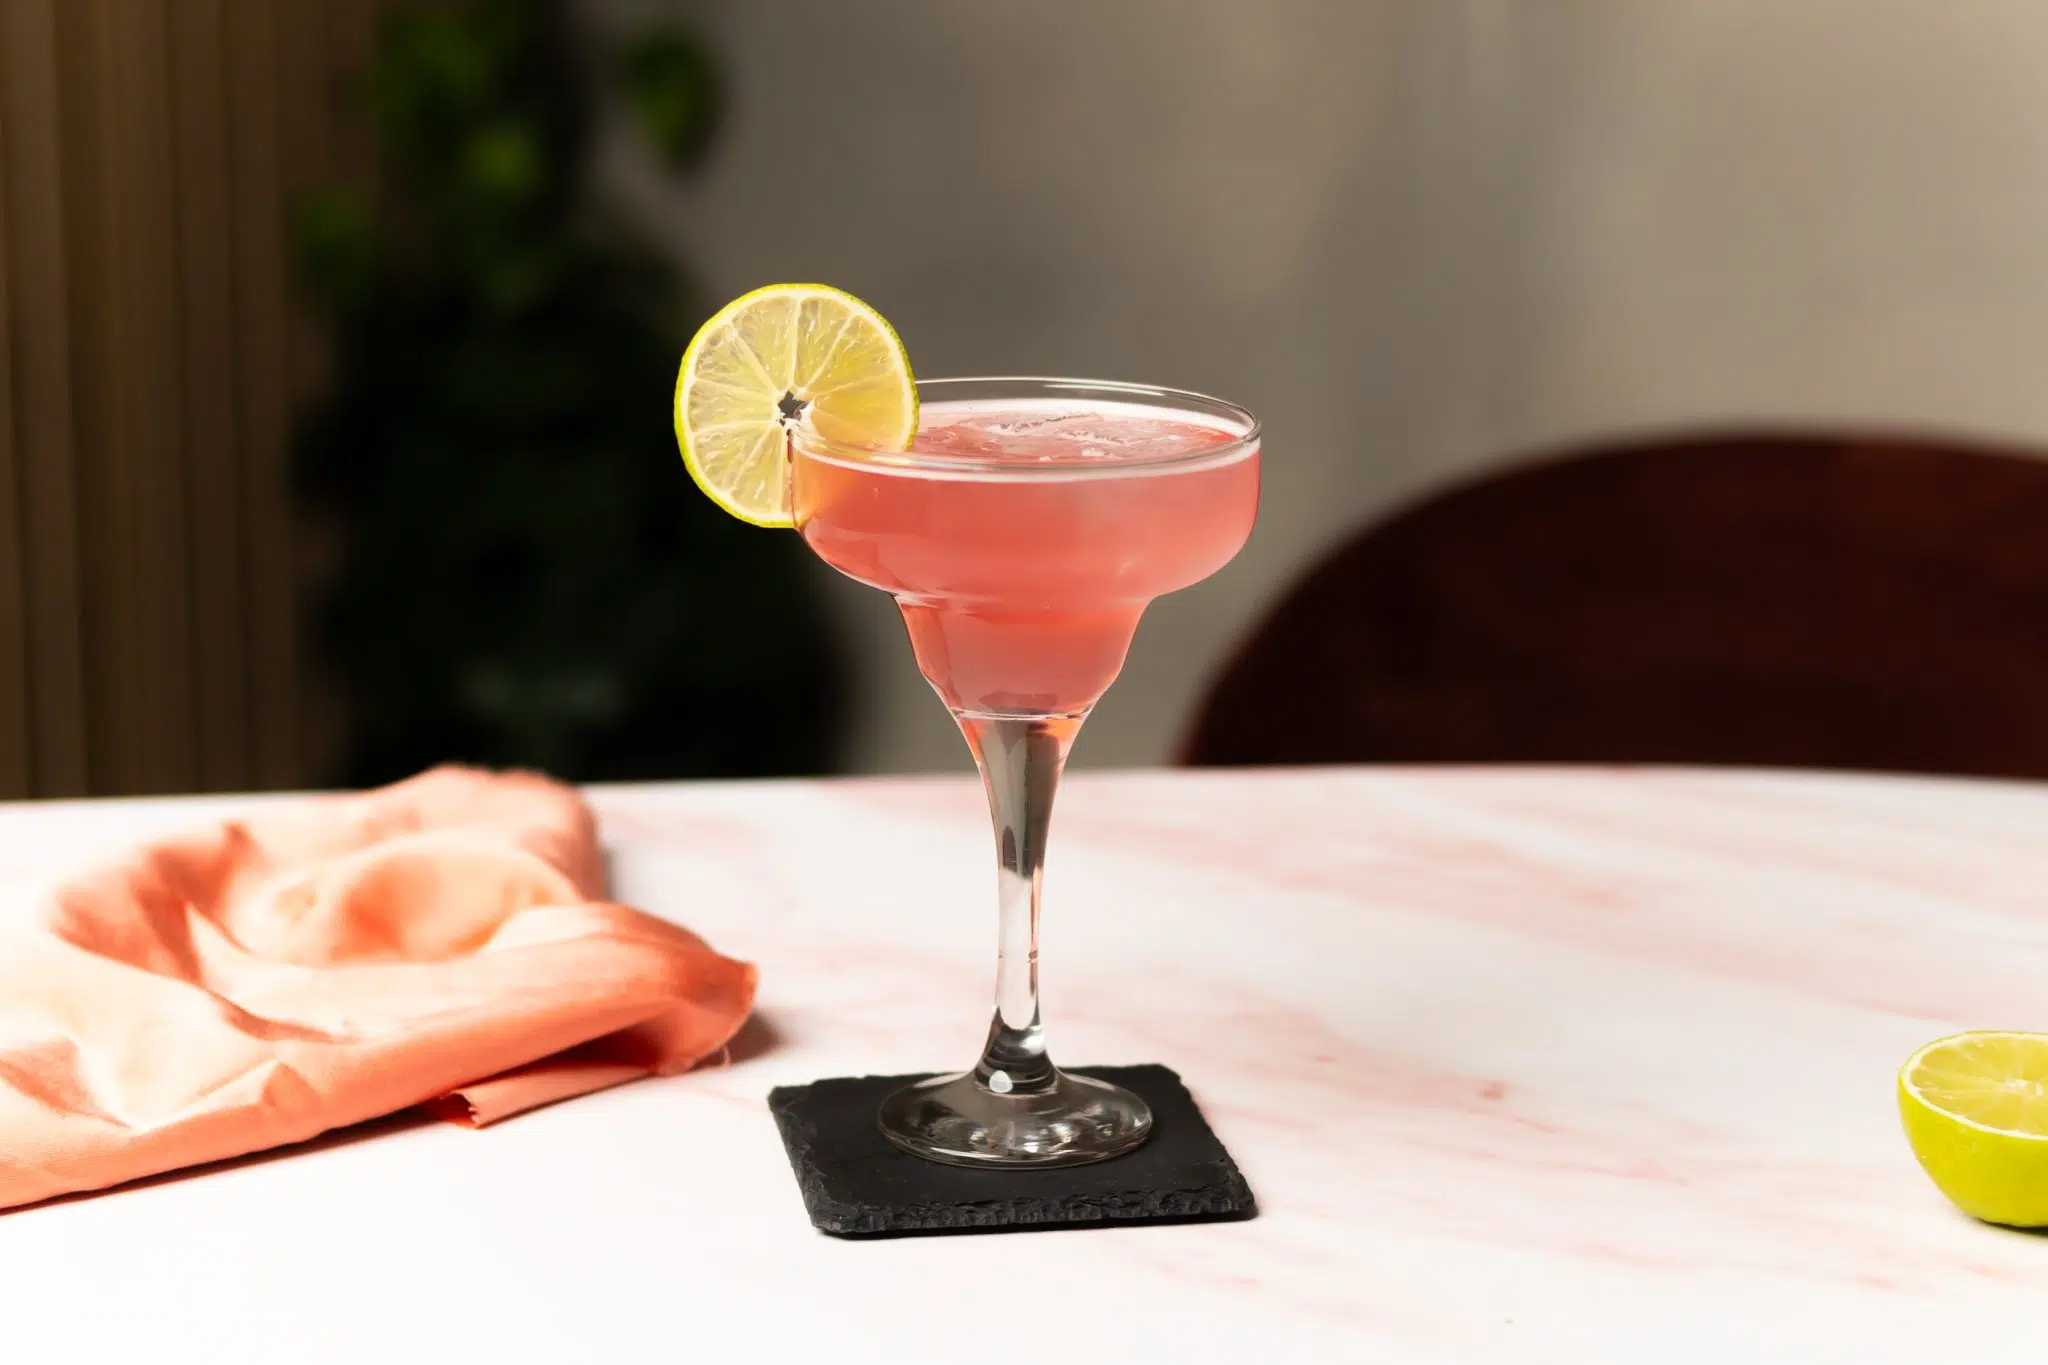 A side shot of a Cranberry Margarita cocktail in a margarita glass on a black stone coaster placed on a table surrounded by a salmon cloth and a lime.